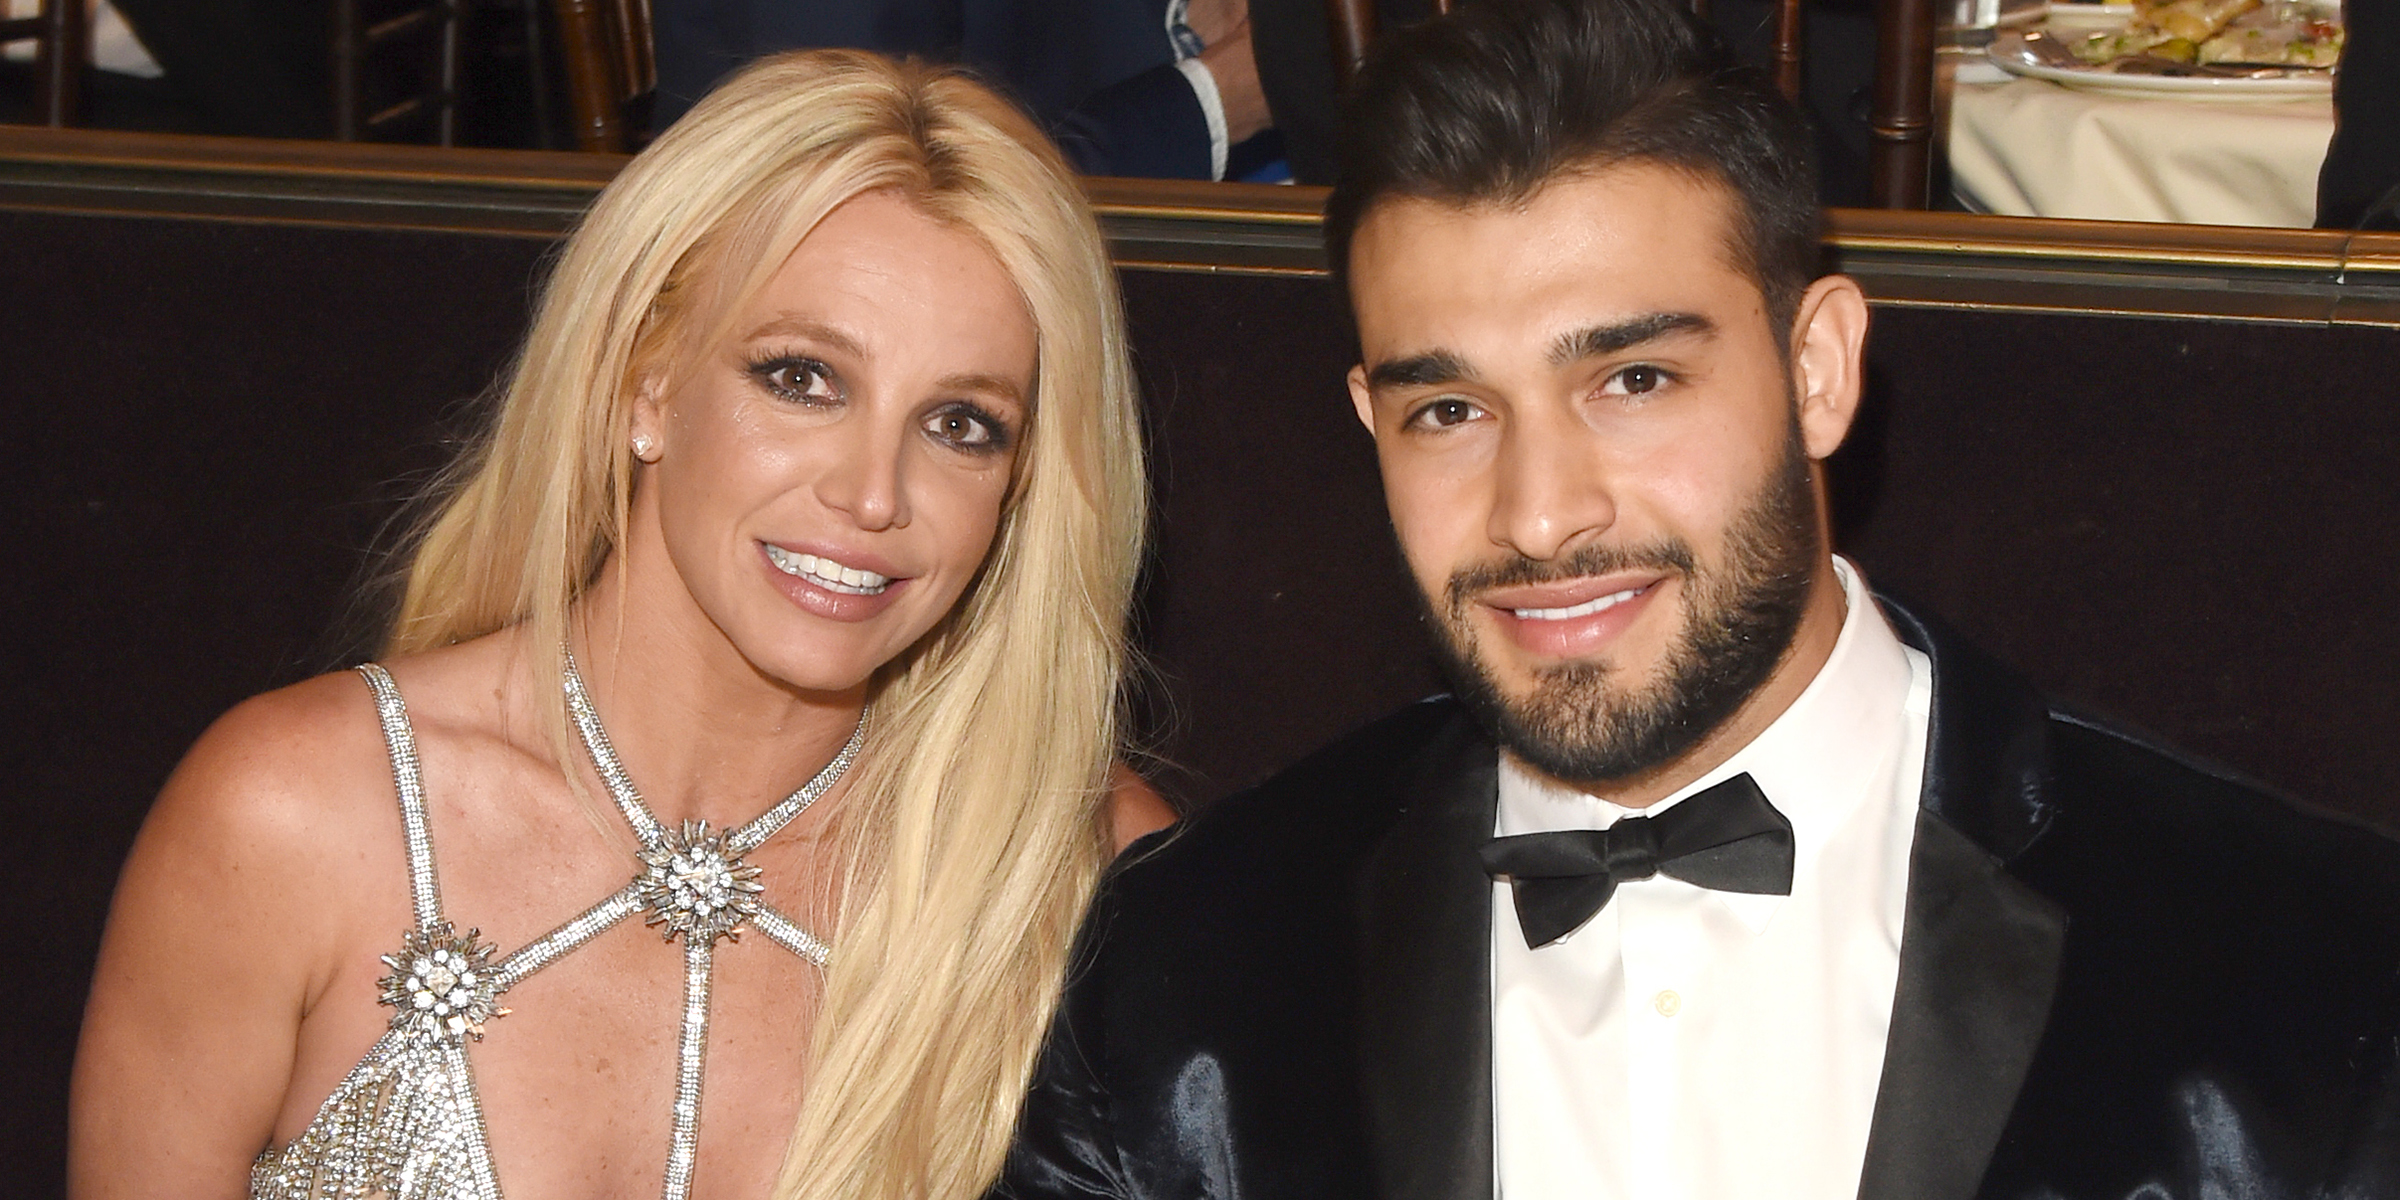 Sam Asghari Claims Britney Spears Cheated With Staff Member, Says He Saw Video of Them in a ‘Compromising Position’